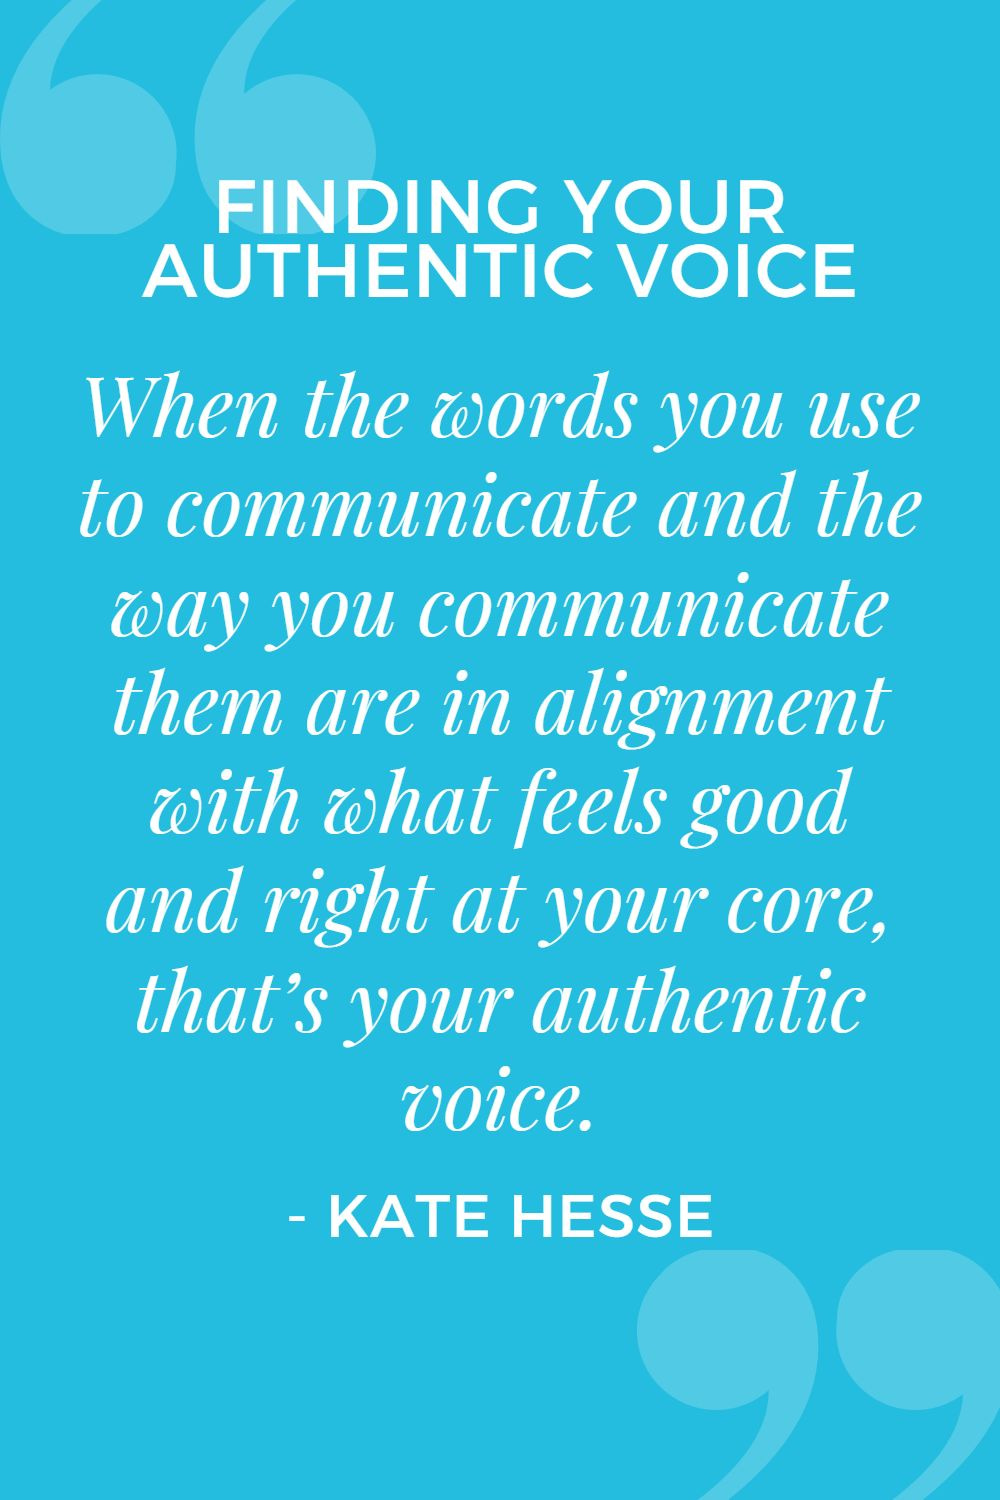 When the words you use to communicate, and the way you communicate them, are in alignment with what feels good and right at your core, that's your authentic voice.